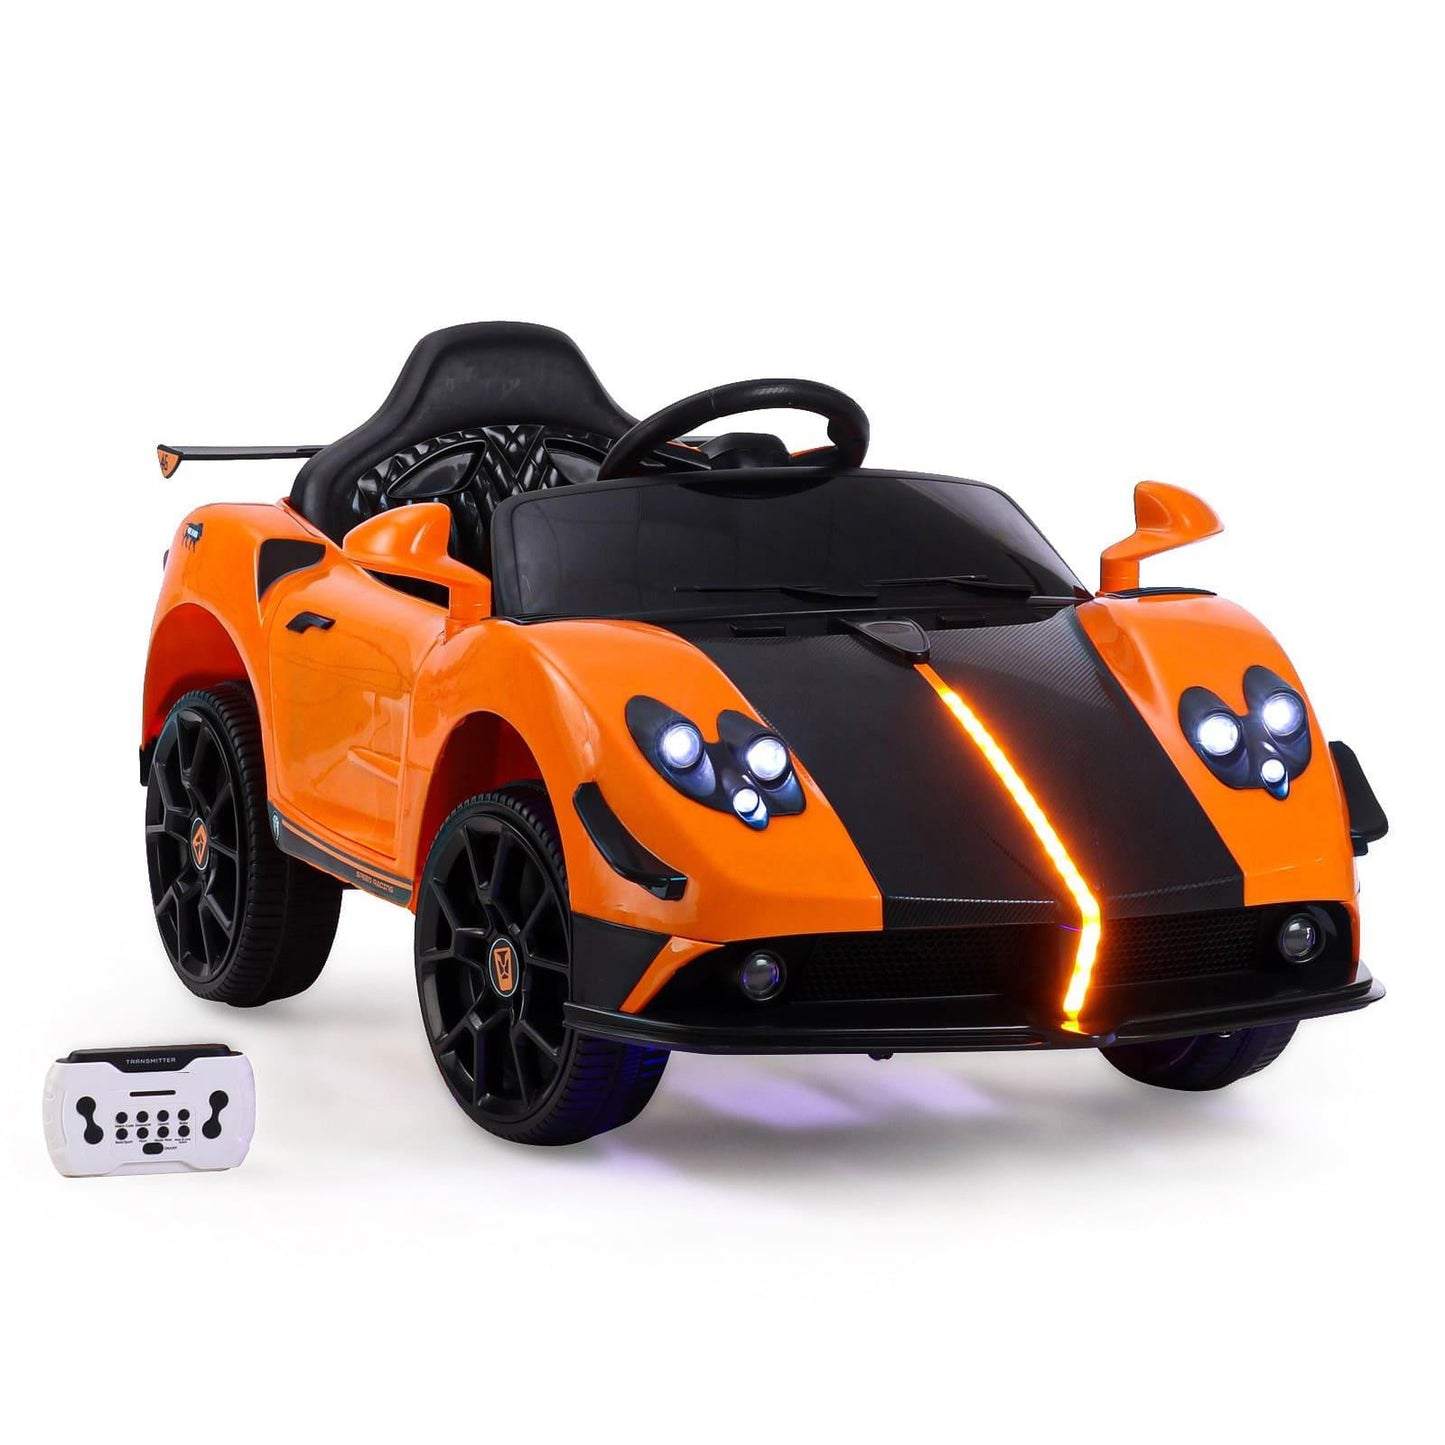 PATOYS | Battery Operated Ride On Car with Music and Lights | LFC-BDQ1589-Orange - PATOYS